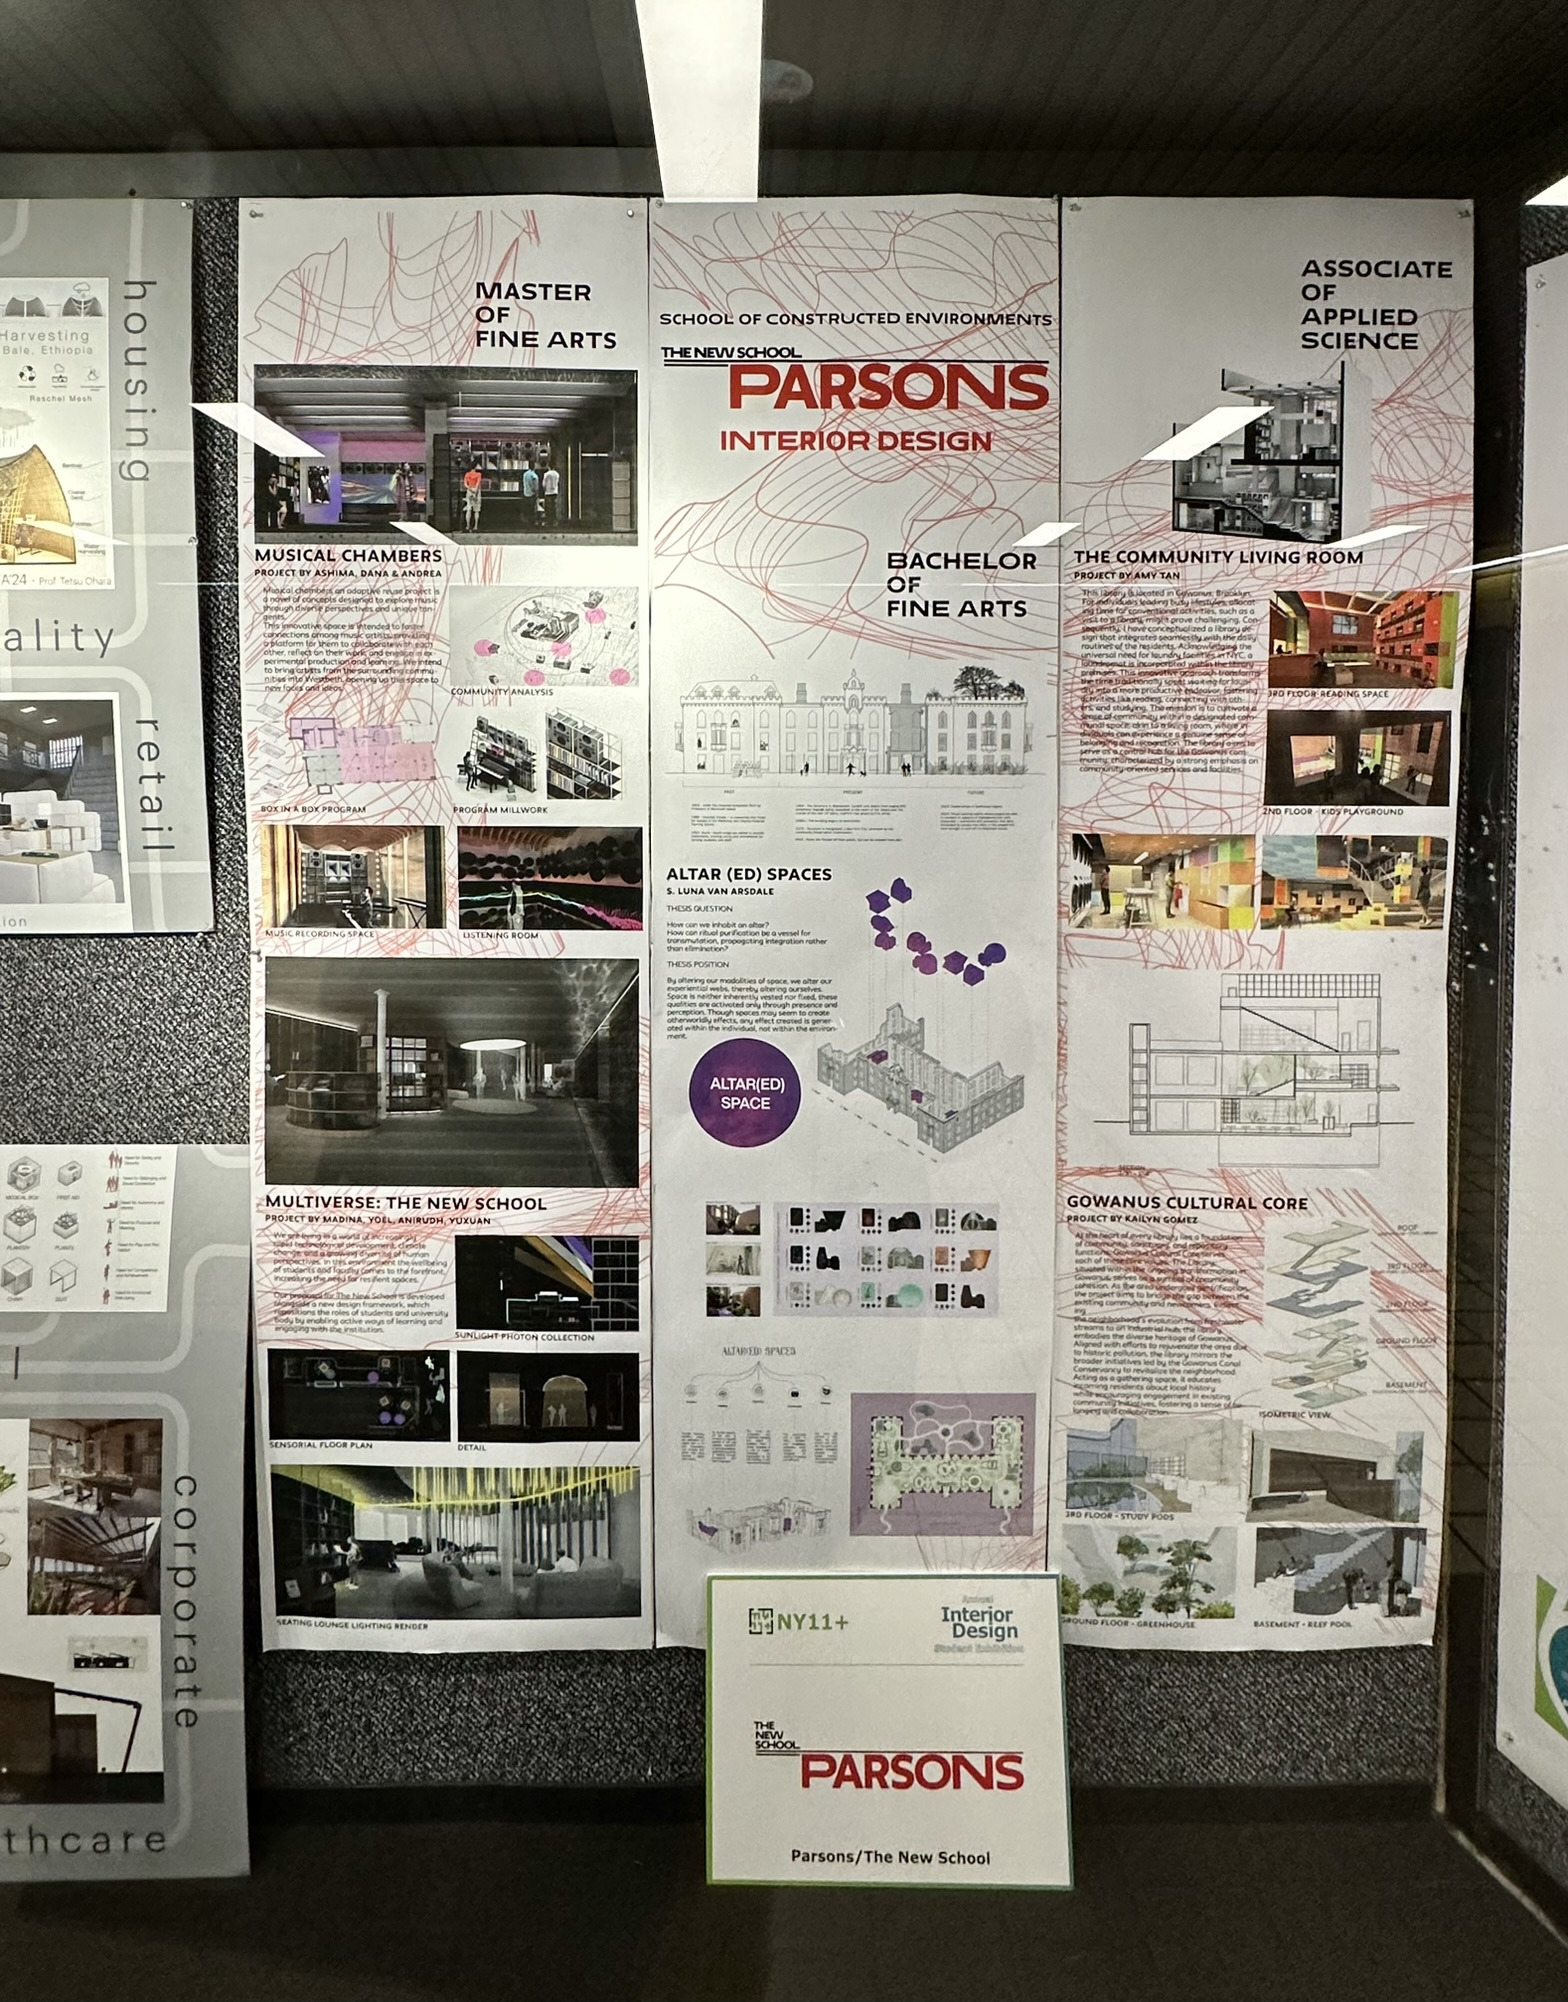 The exhibit, “Paths to Professionalism,” was presented by New York Eleven Plus, an organization committed to promoting the transformative power of interior design and raising awareness of the profession itself